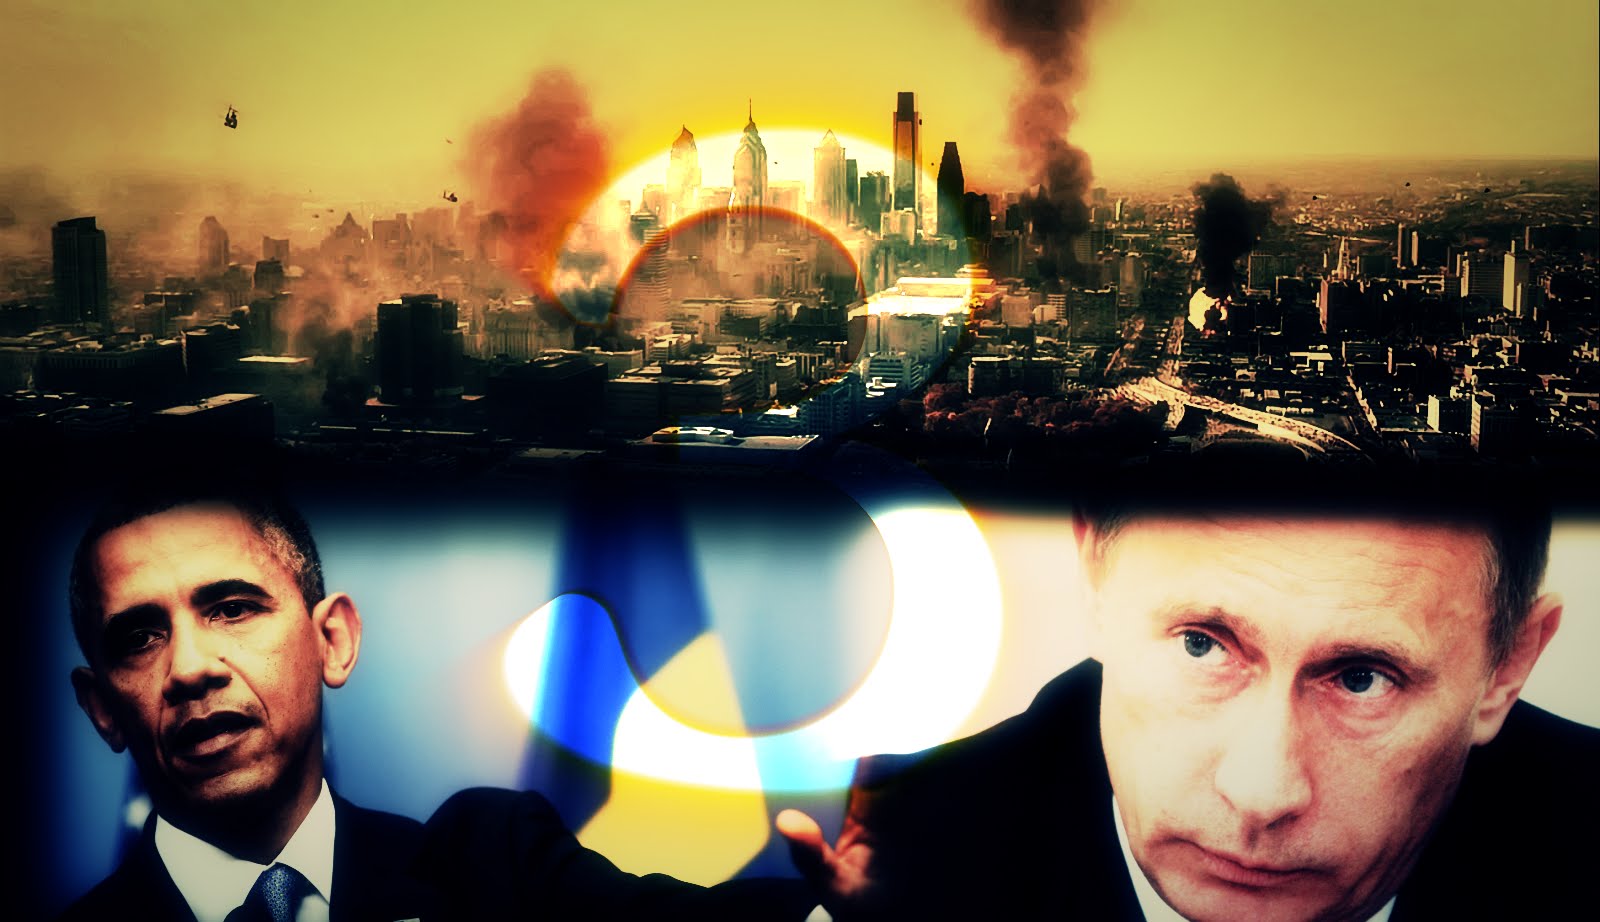 Fox news: Putin says that World War 3 is coming and it’s a plan to depopulate the world